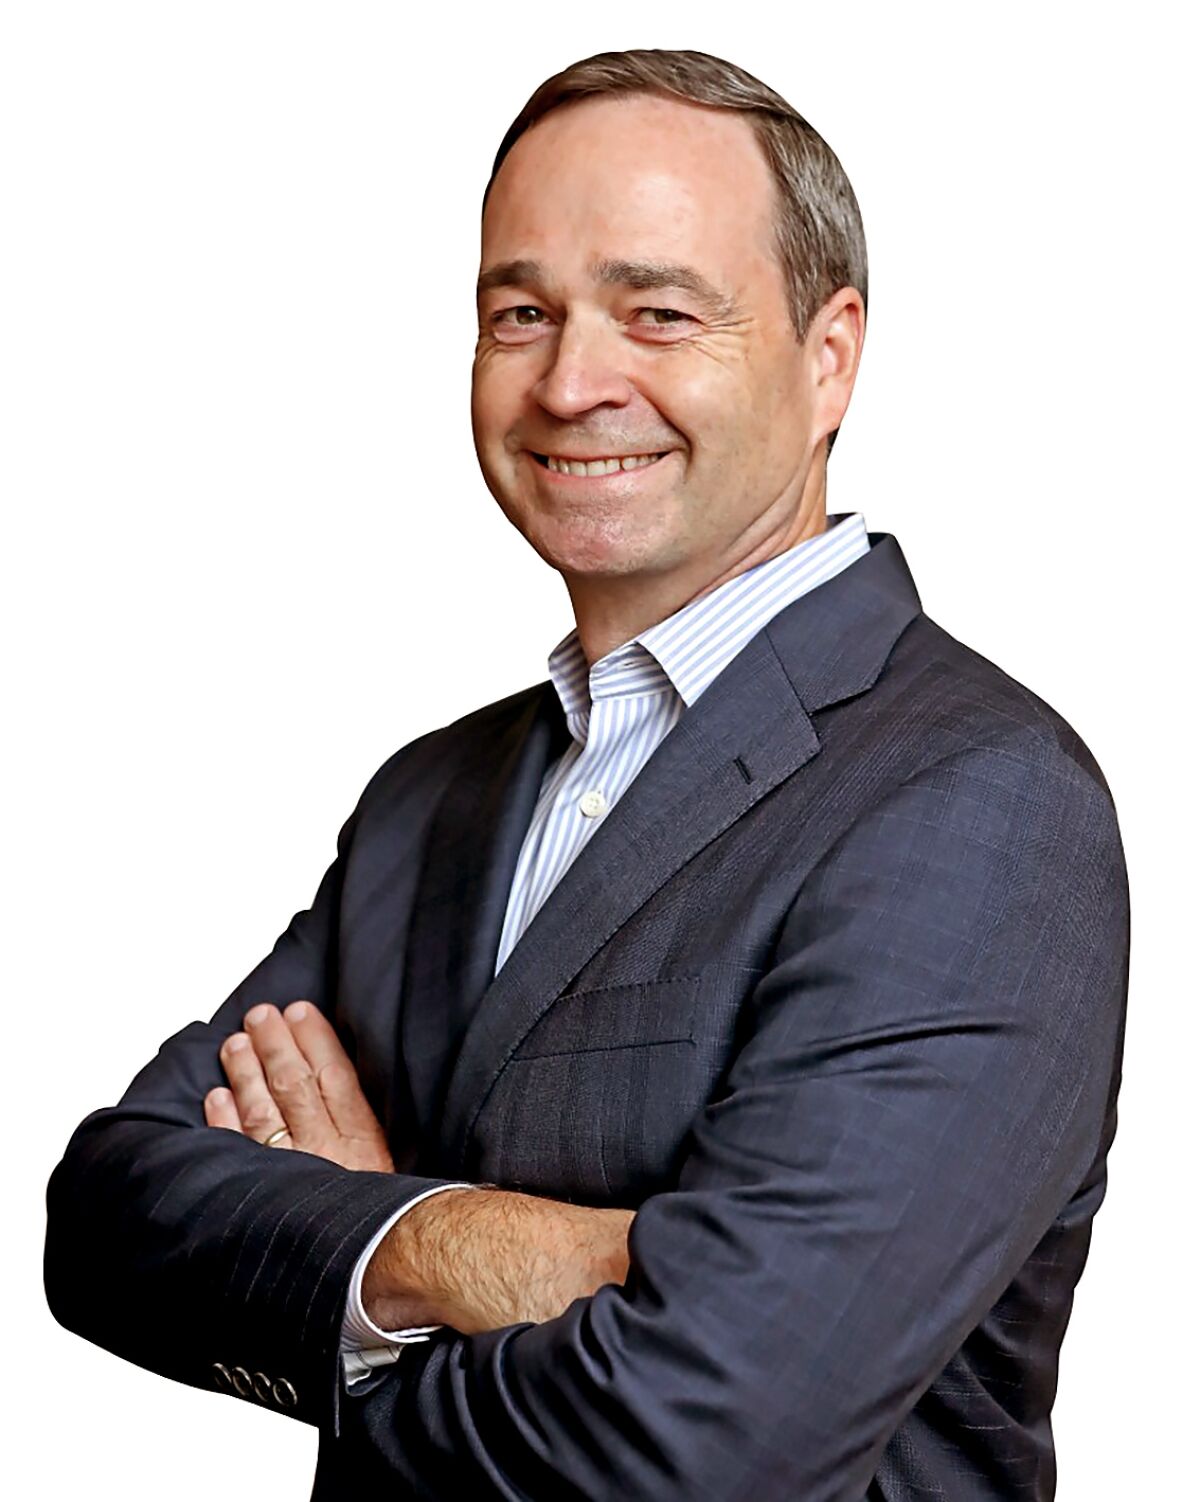 Patrick Pacious is president and chief executive of Choice Hotels International Inc.